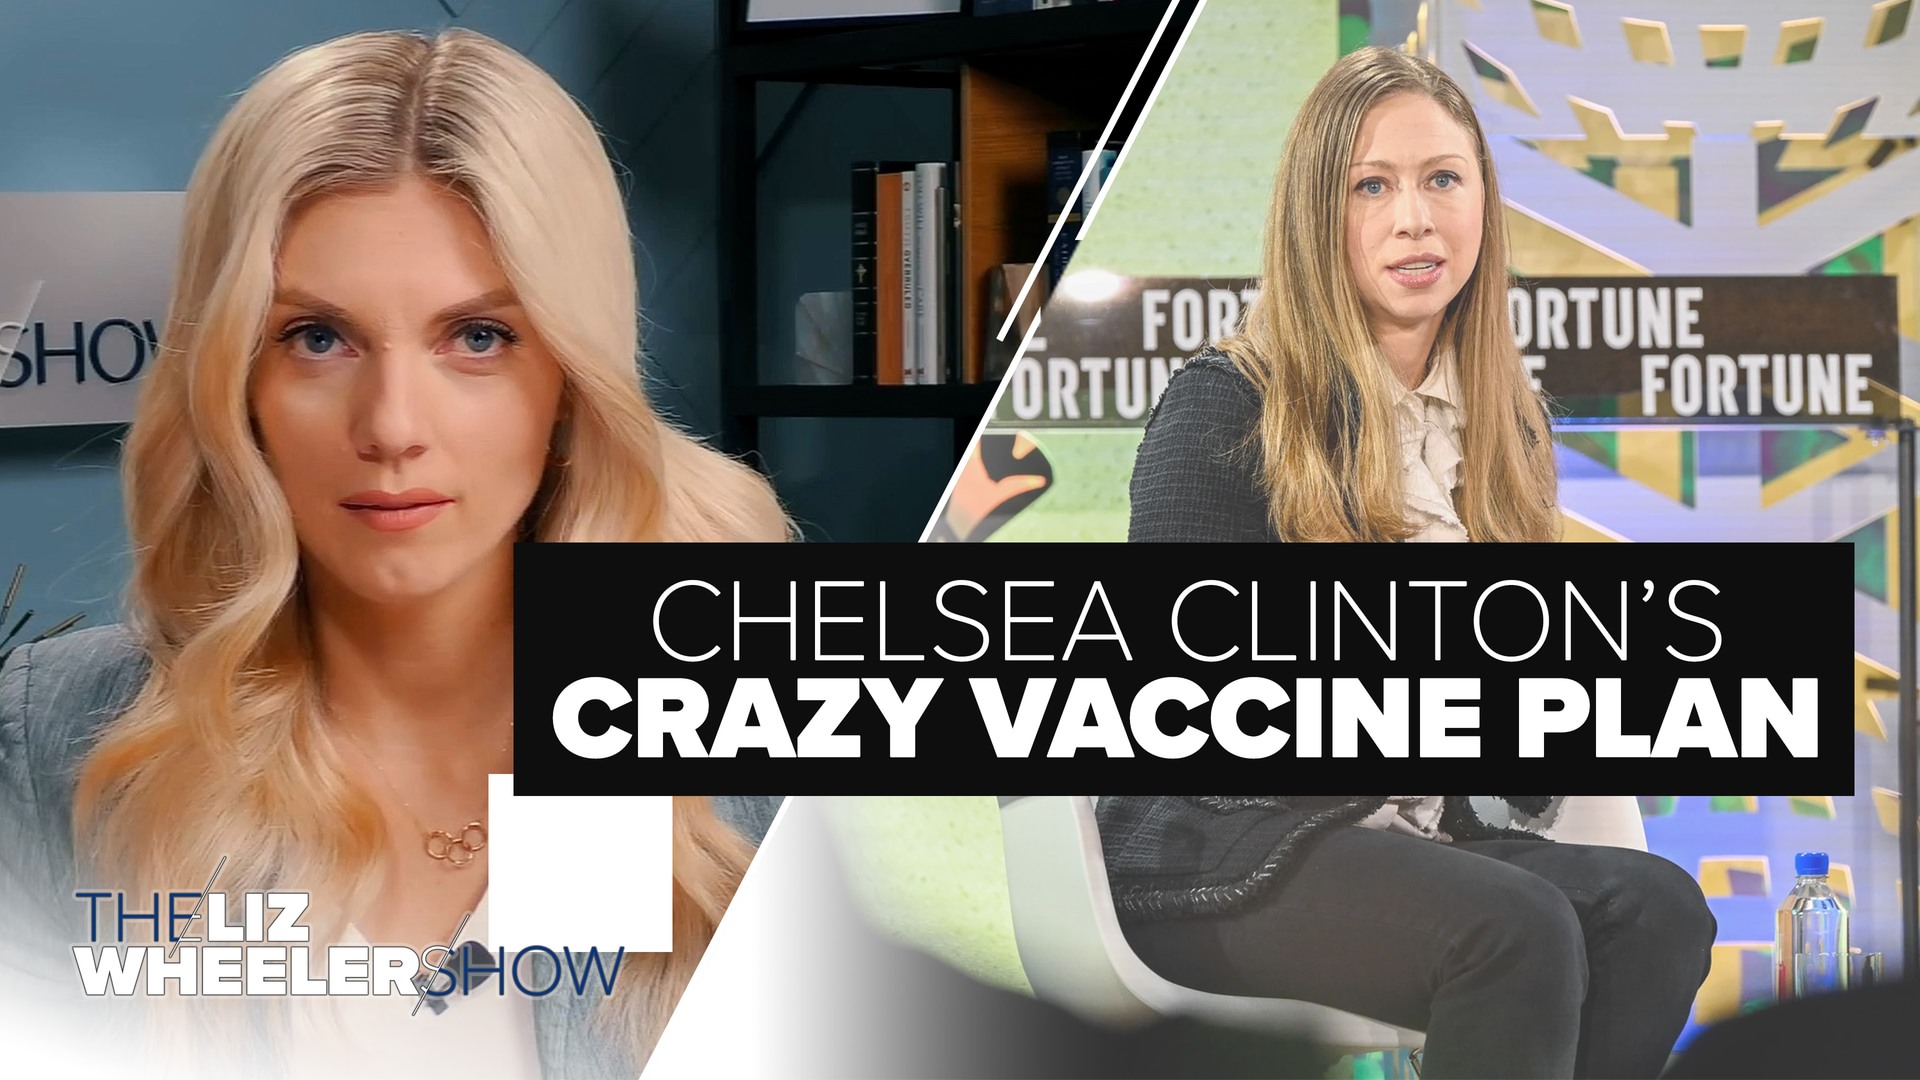 Chelsea Clinton speaks at a Fortune Magazine interview